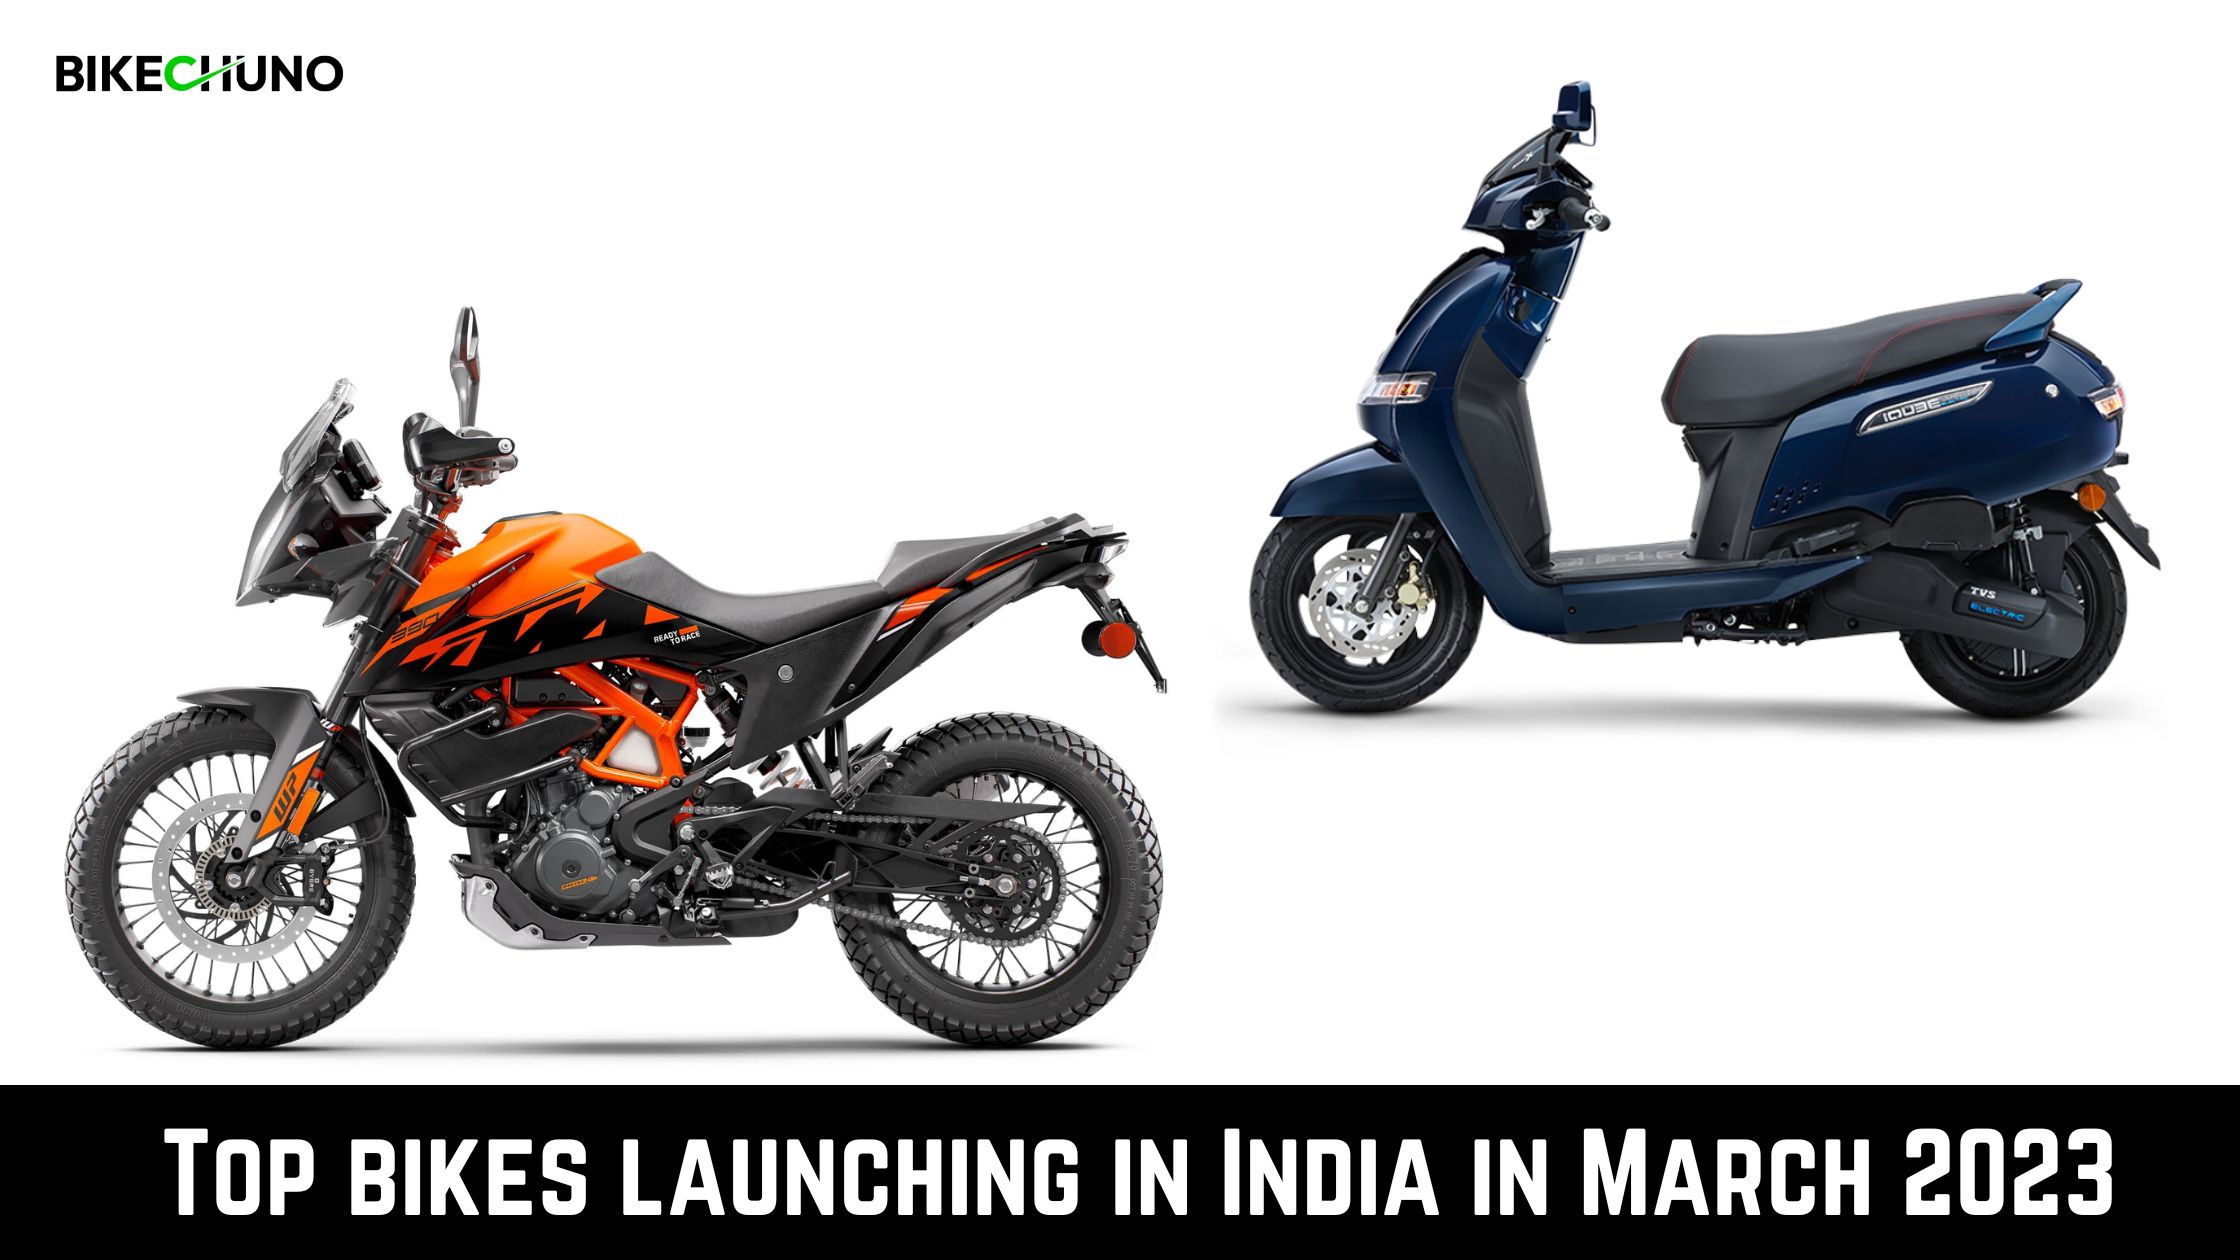 Top bikes launching in India in March 2023